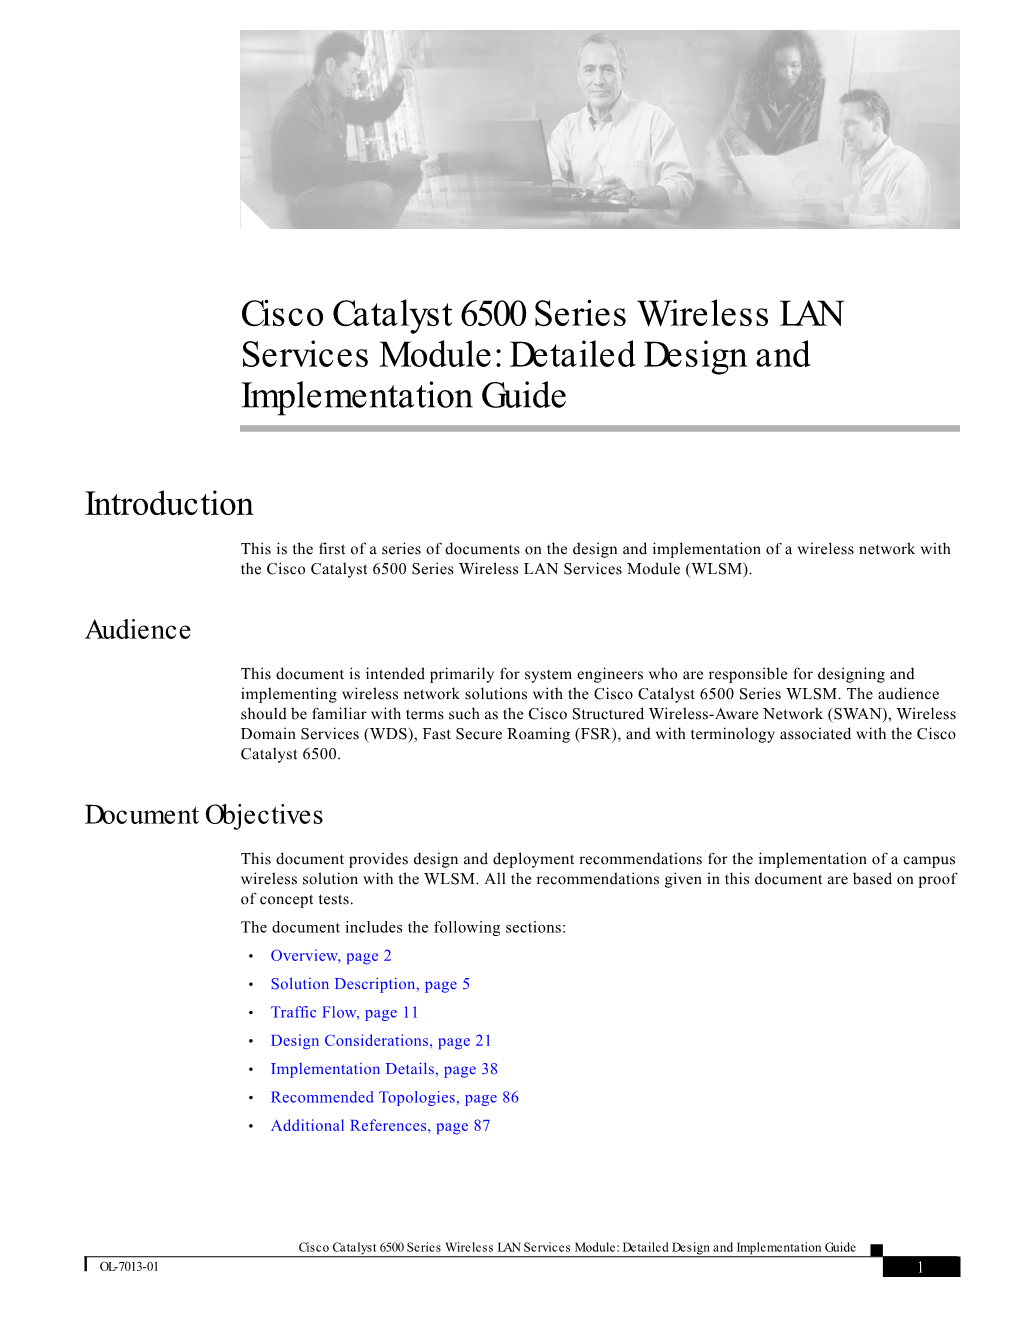 Cisco Catalyst 6500 Series Wireless LAN Services Module: Detailed Design and Implementation Guide